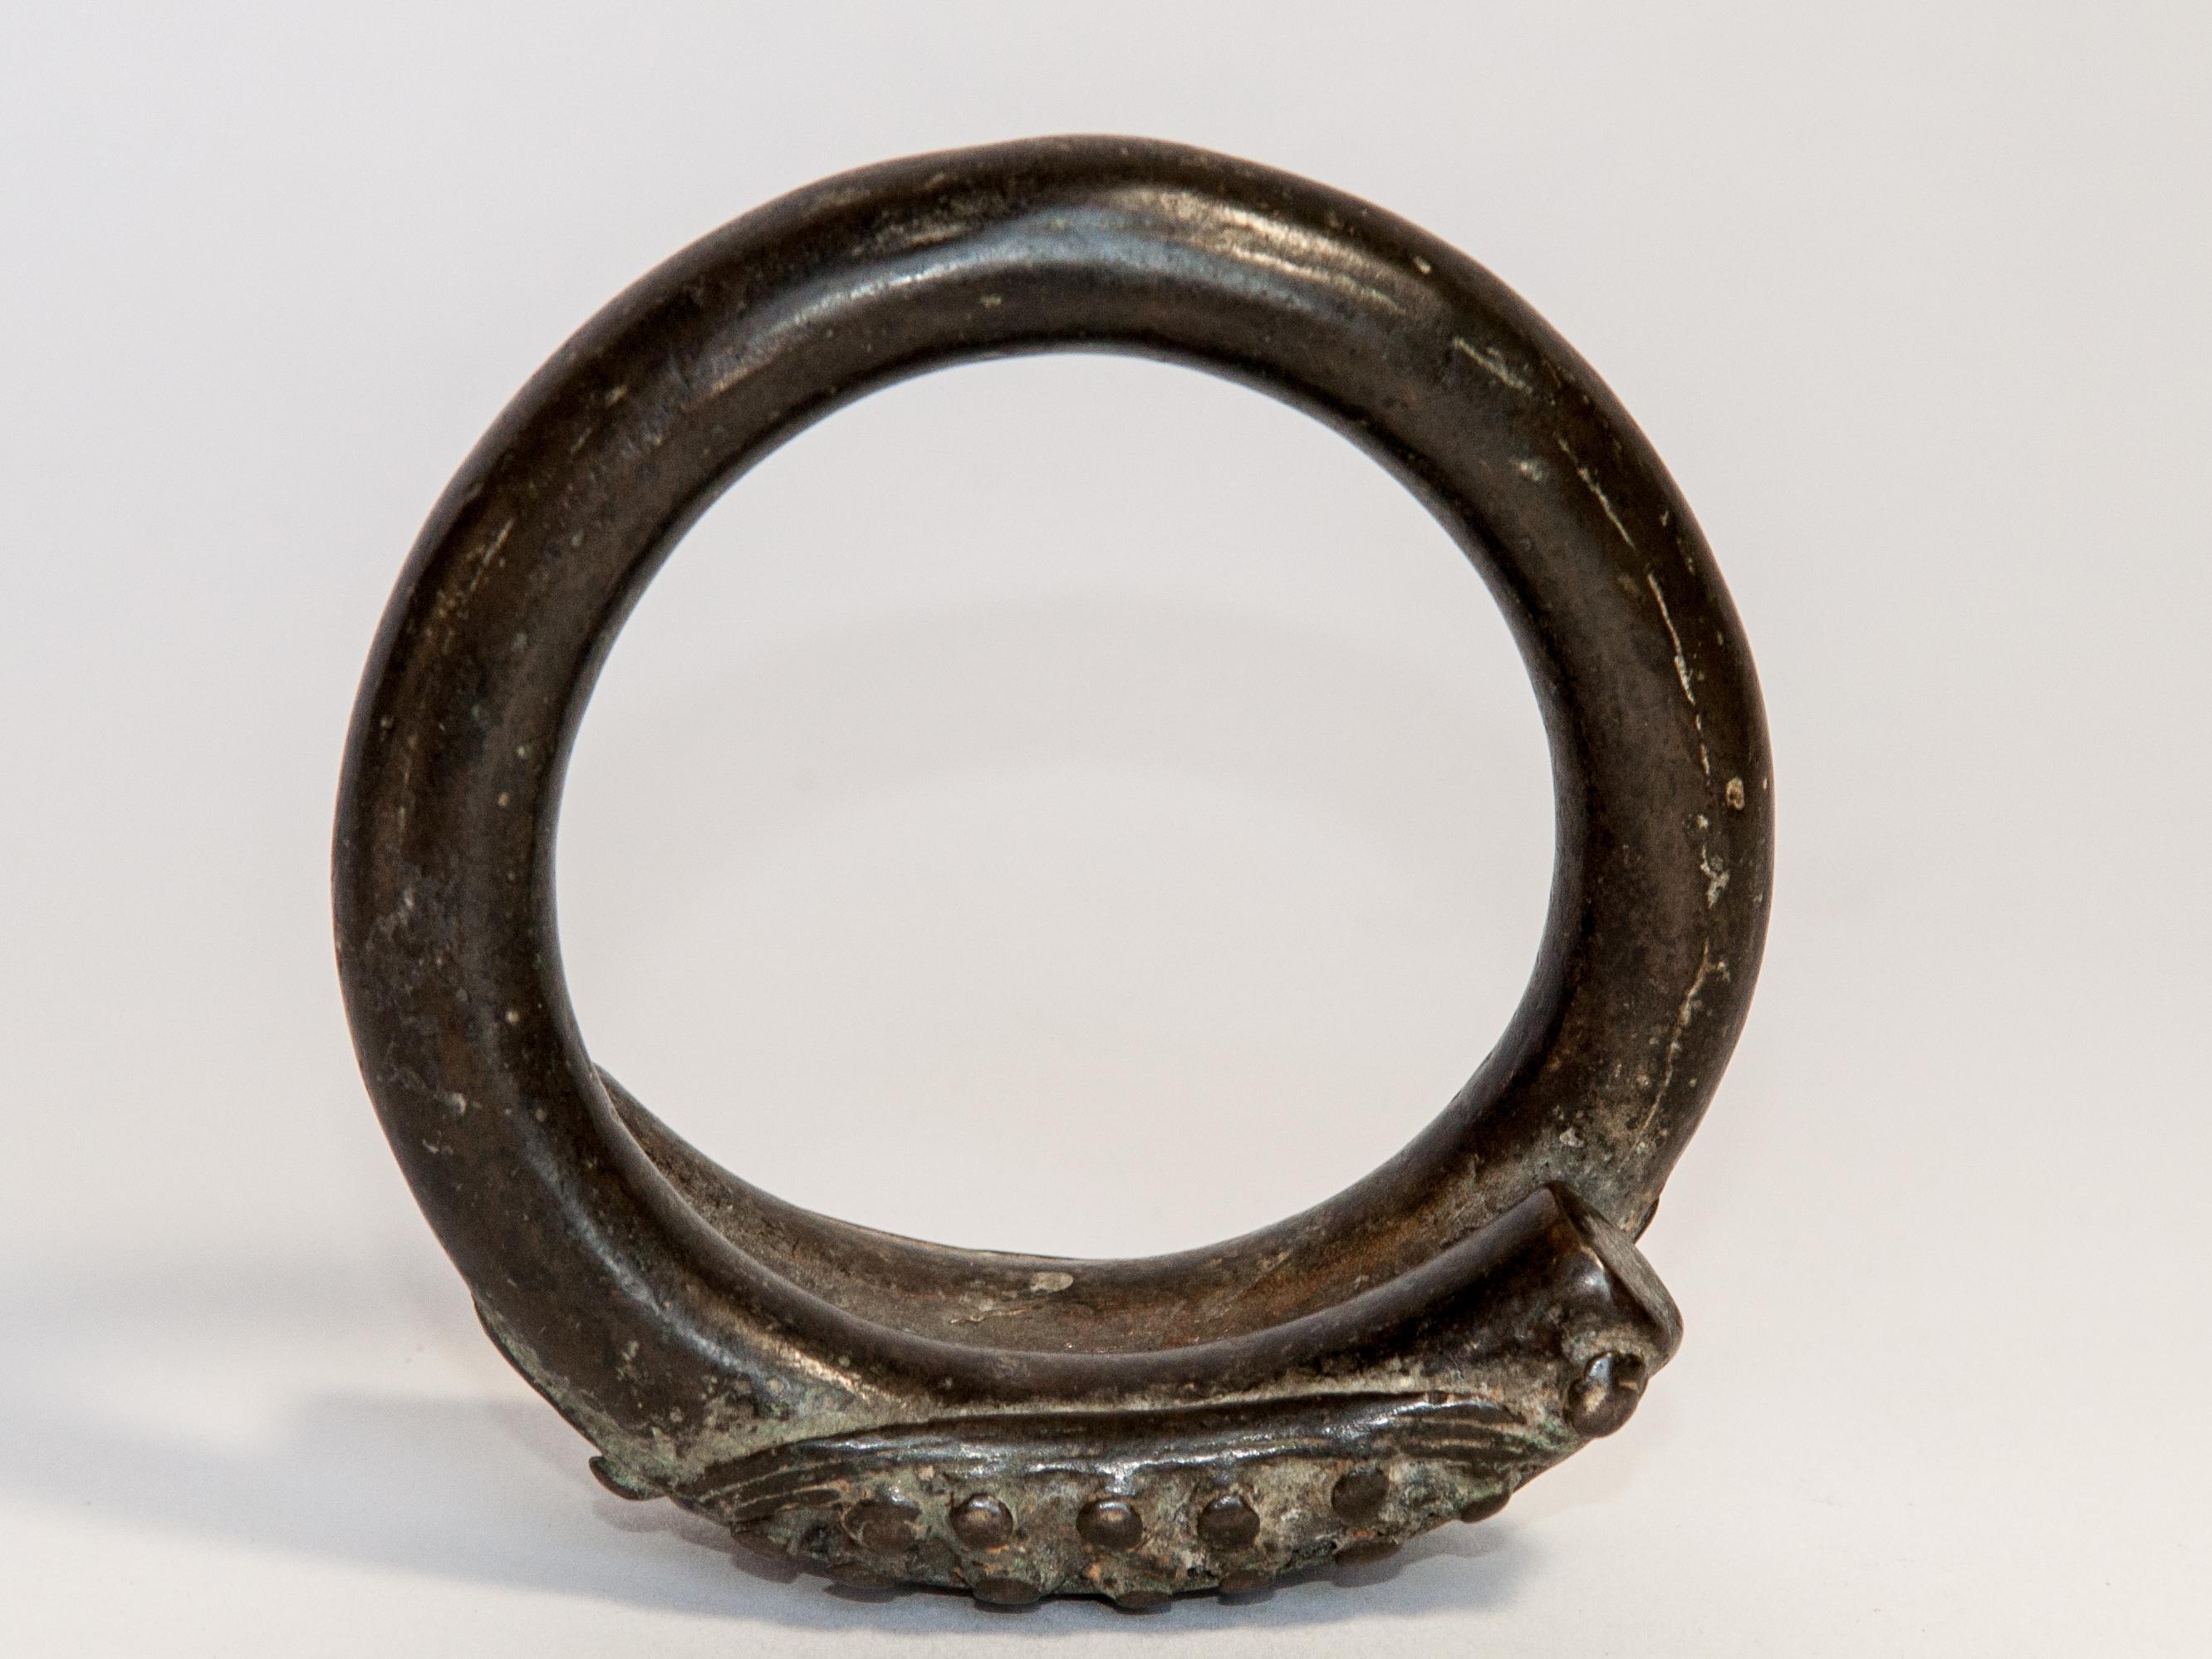 Antique Bronze Bracelet from Laos with a Naga or Serpent Motif, 18th Century 2